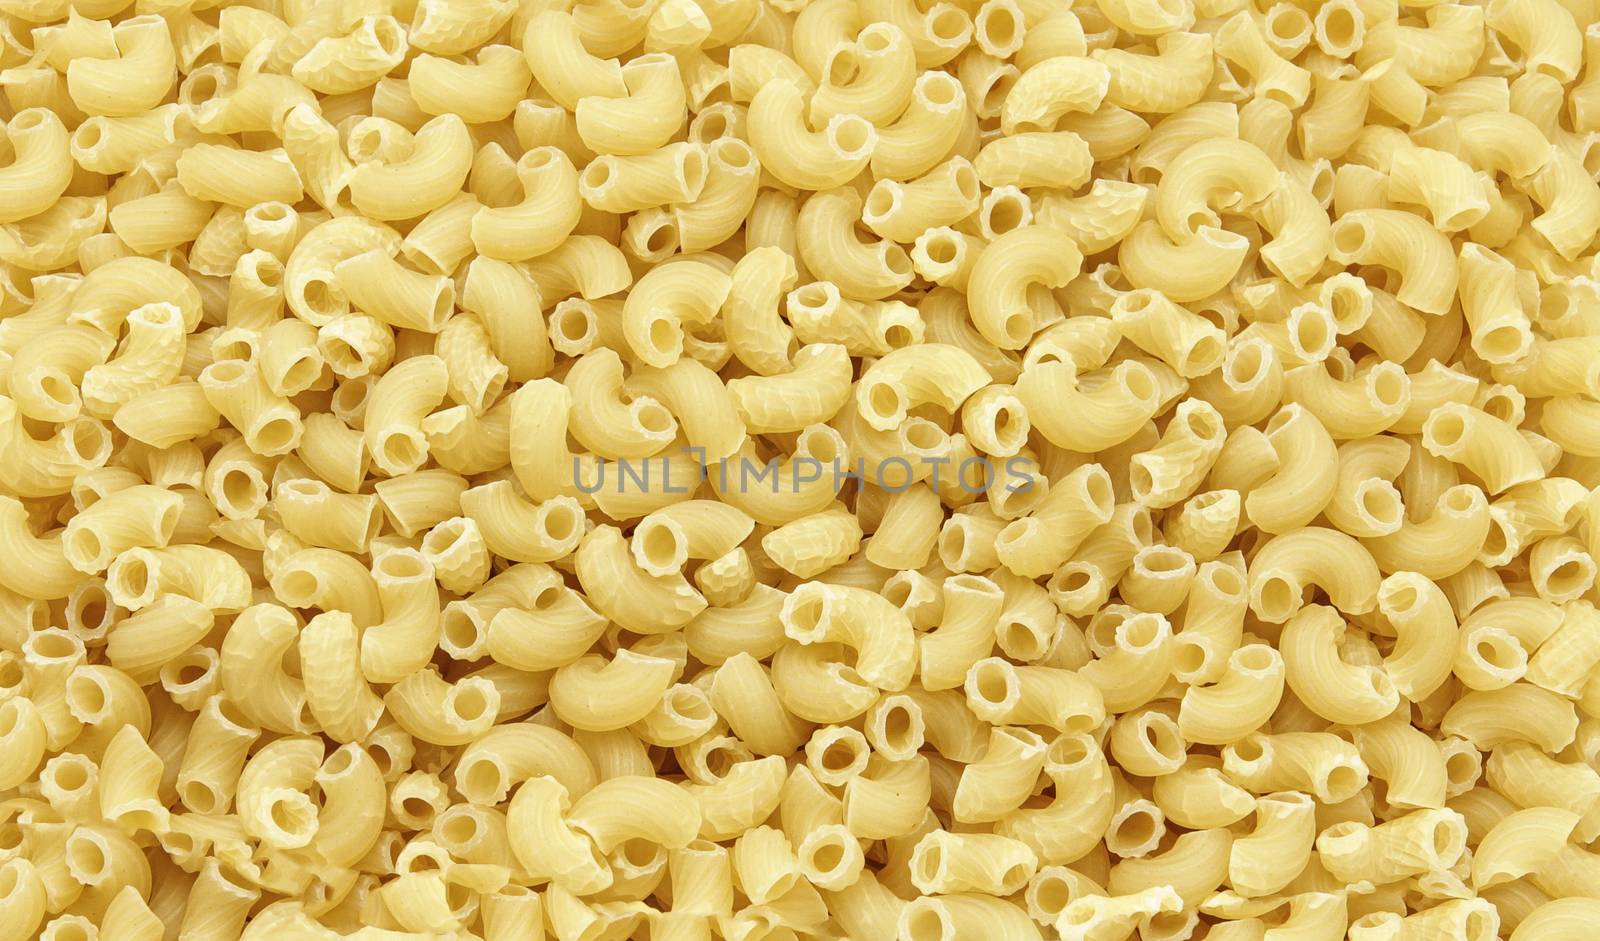 Coil macaroni macro with additional texture and details, close-up